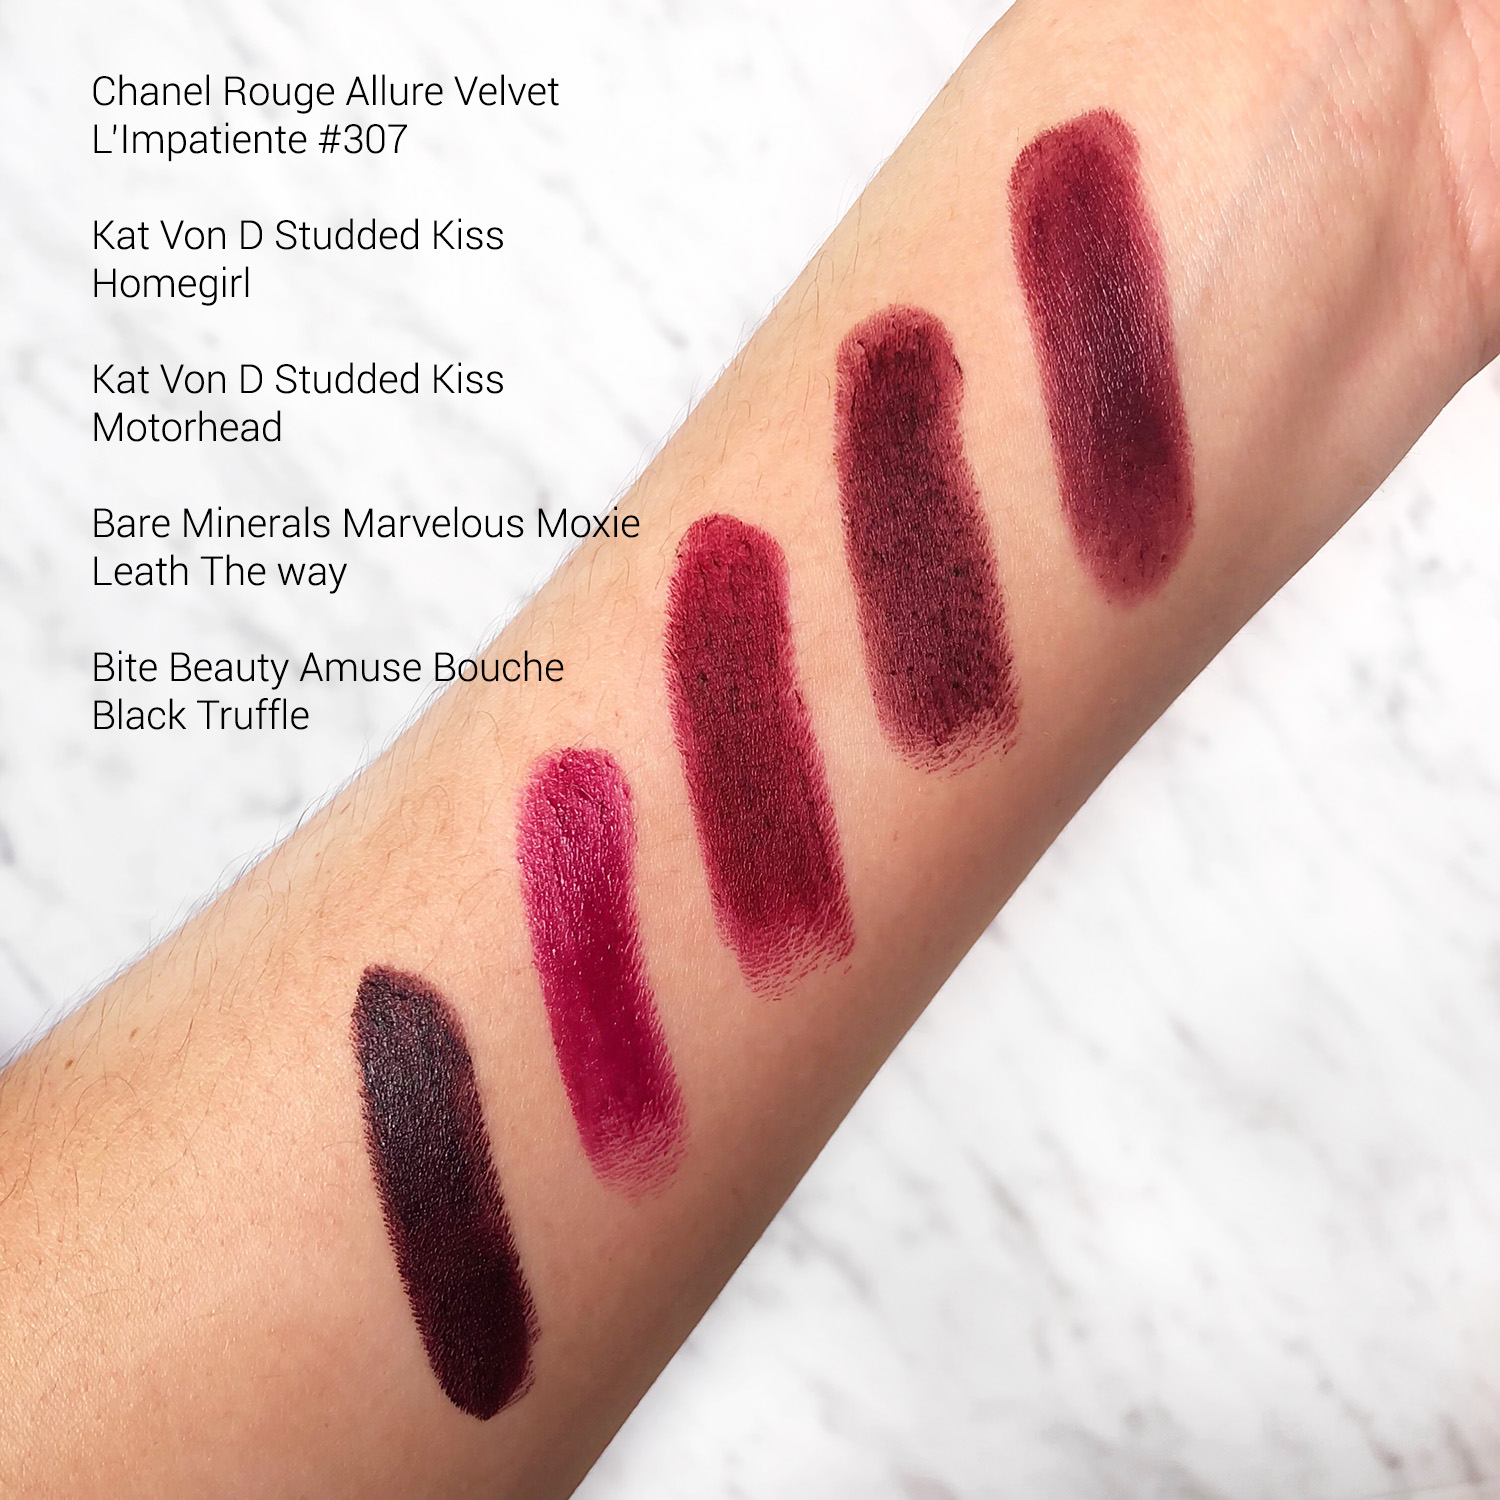 Tips to Prep Your Pout for Dark Lipstick